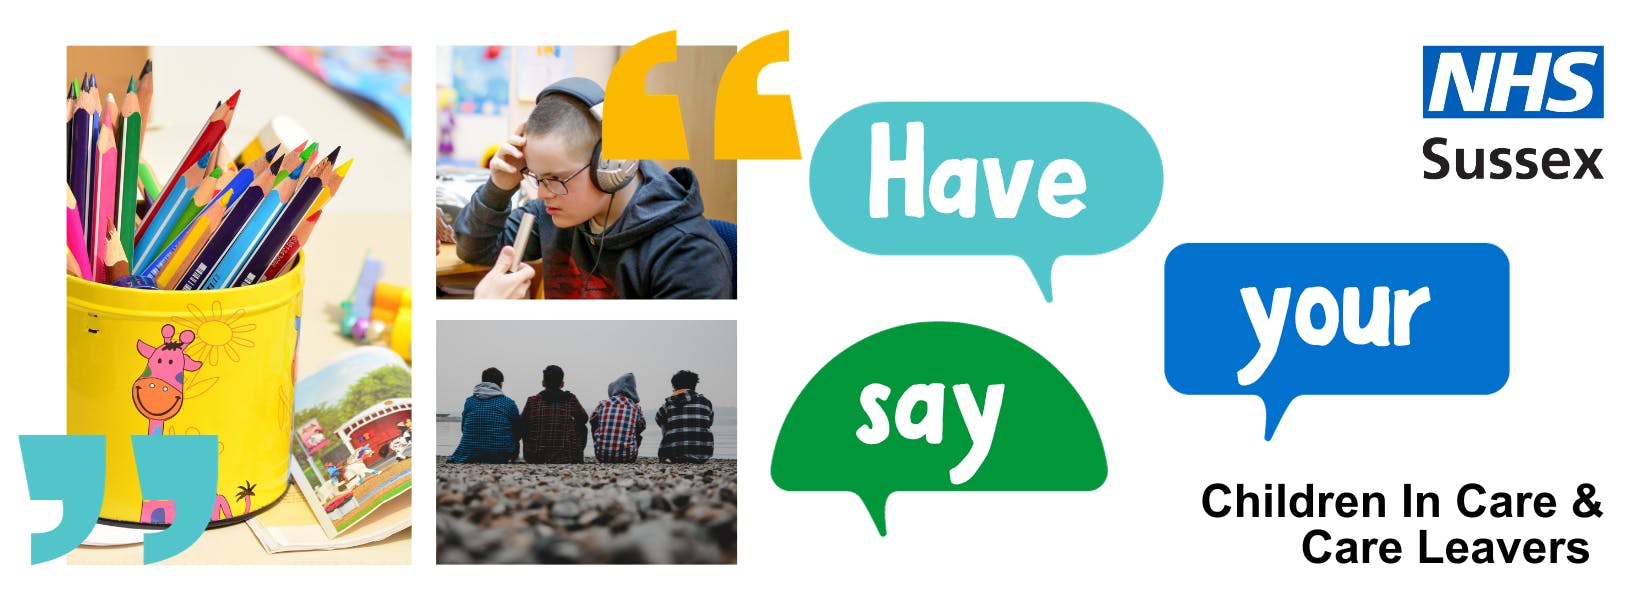 Photos of young people, next to speech bubbles saying: Have your say, children in care and care leavers